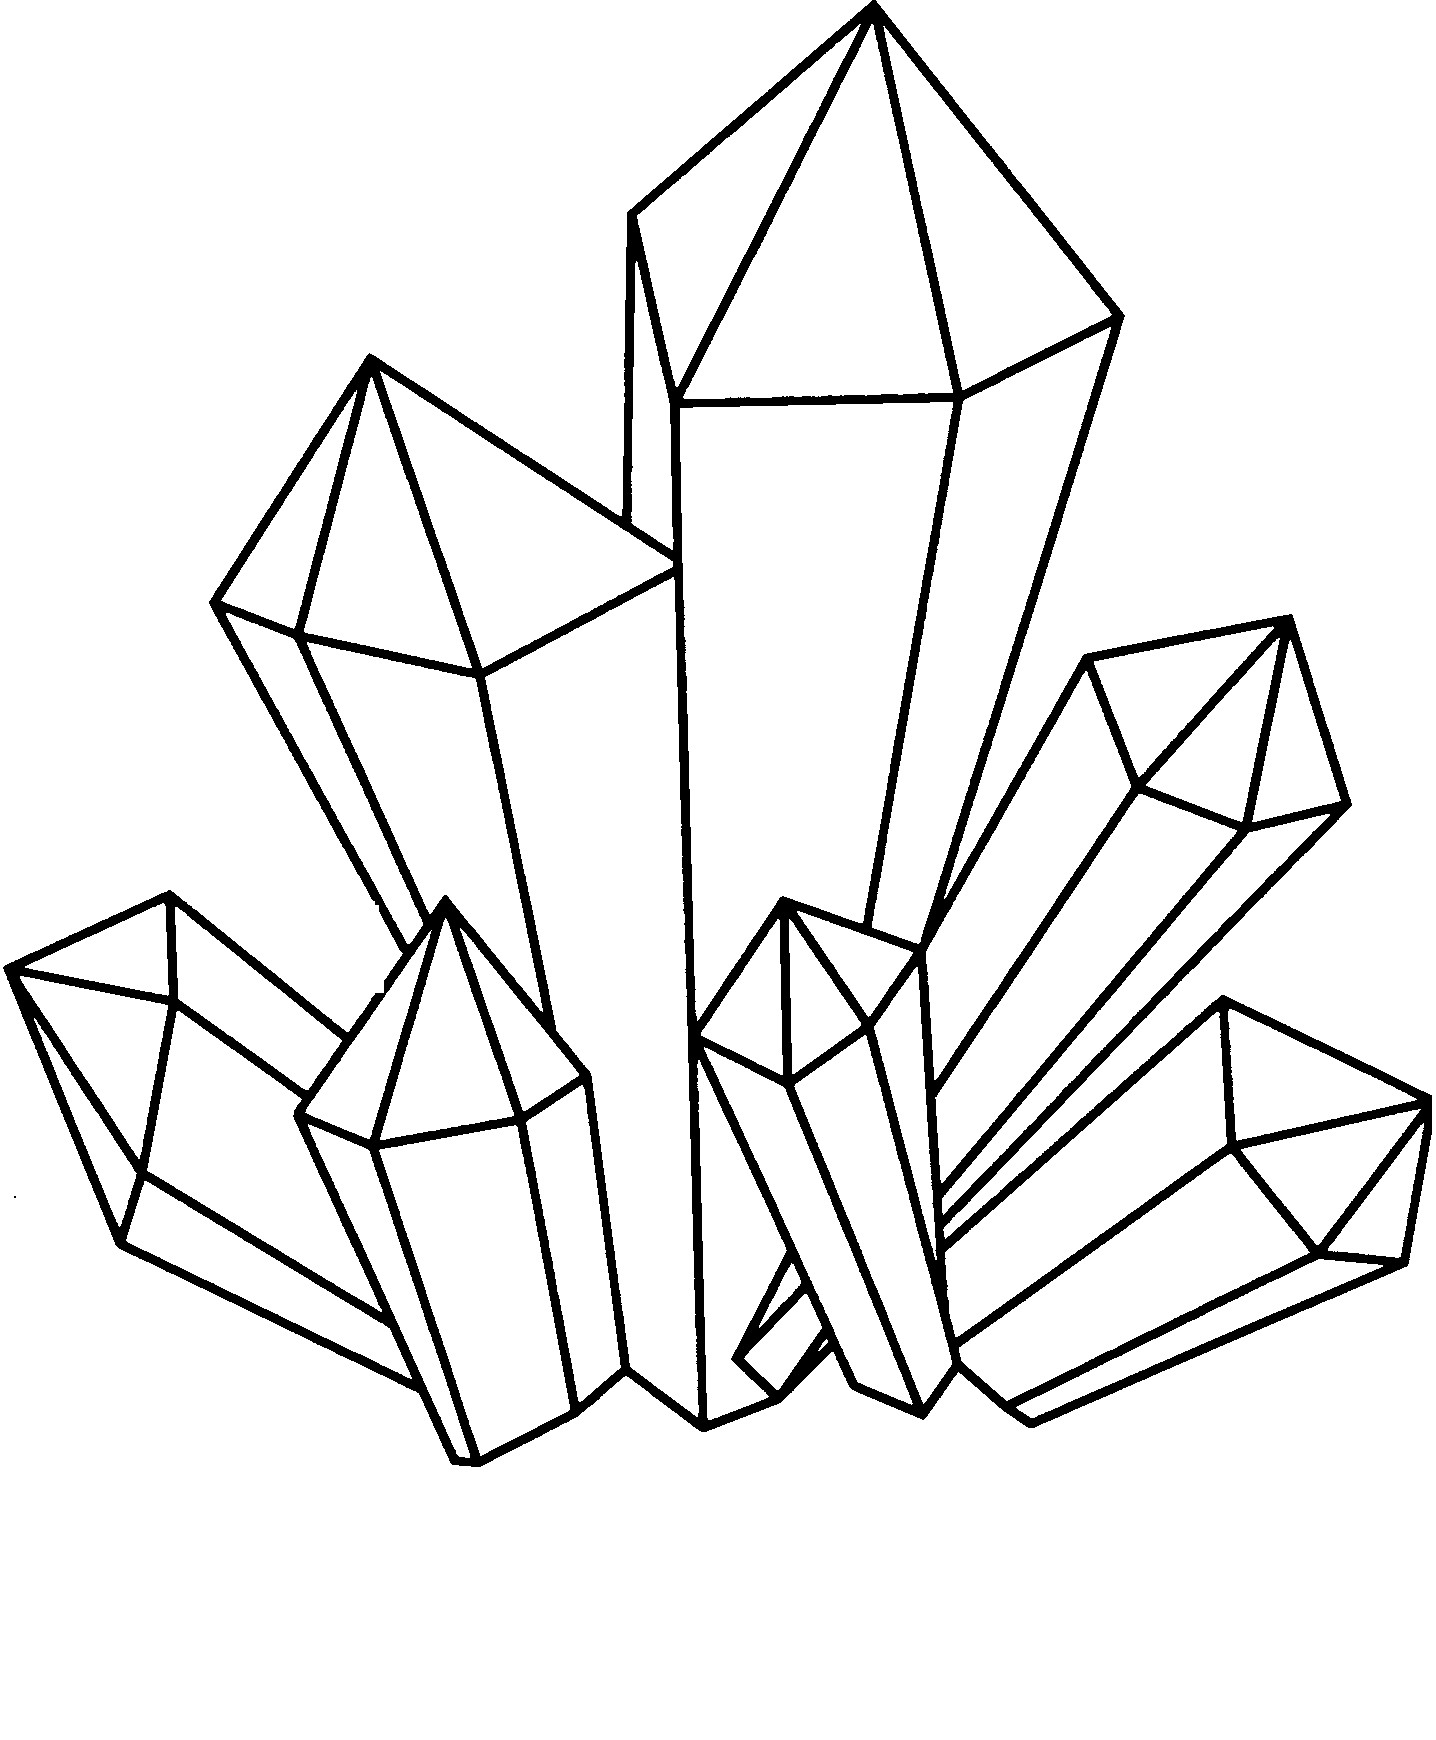 Crystal Coloring Pages
 Drawn crystal amethyst stone Pencil and in color drawn